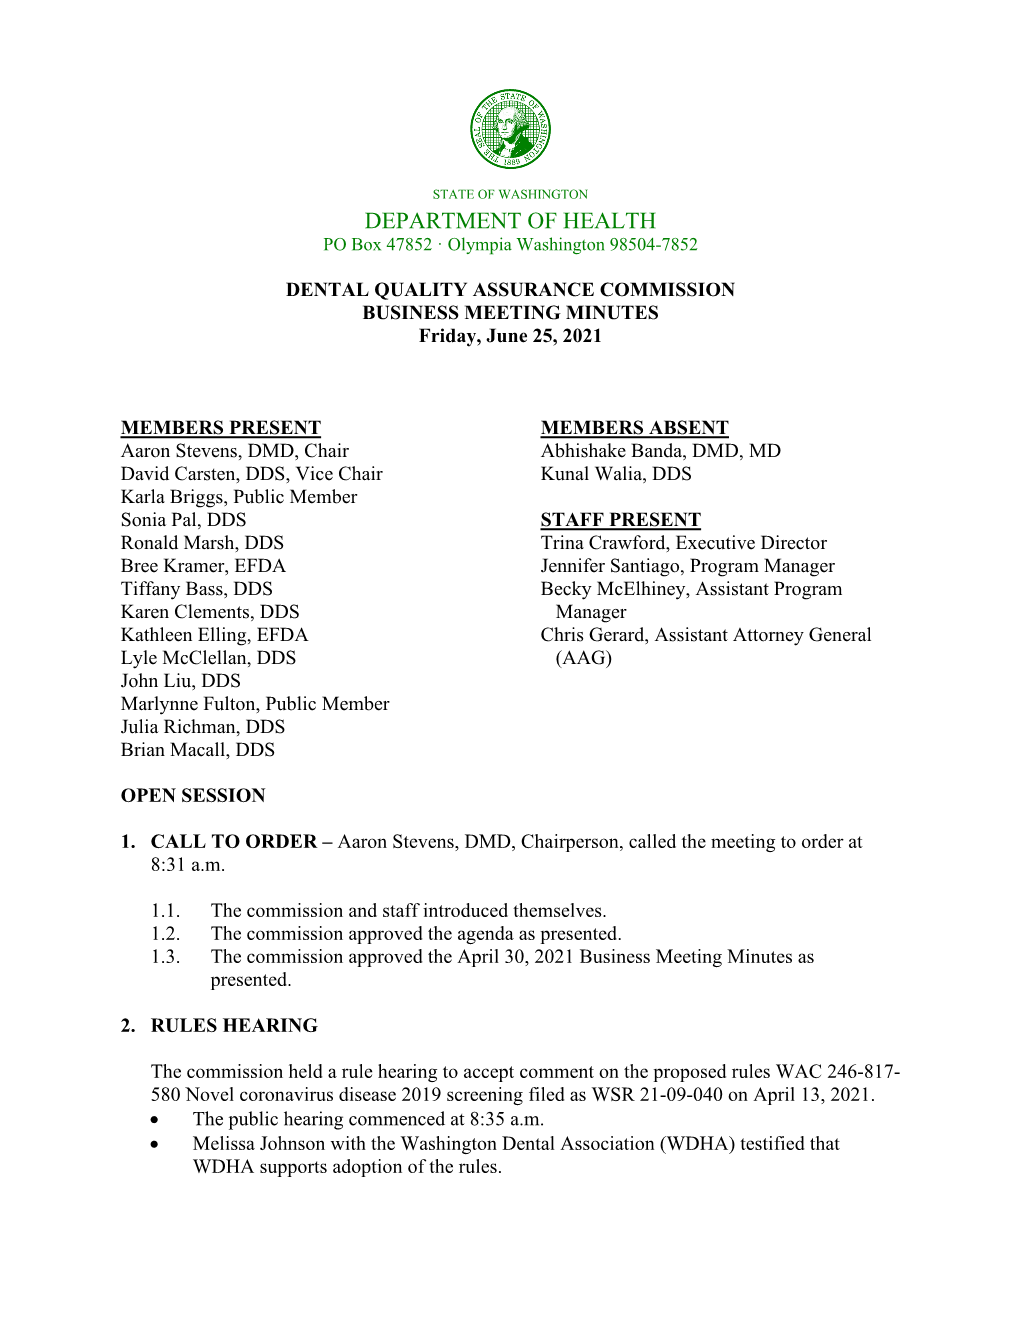 DENTAL QUALITY ASSURANCE COMMISSION BUSINESS MEETING MINUTES Friday, June 25, 2021